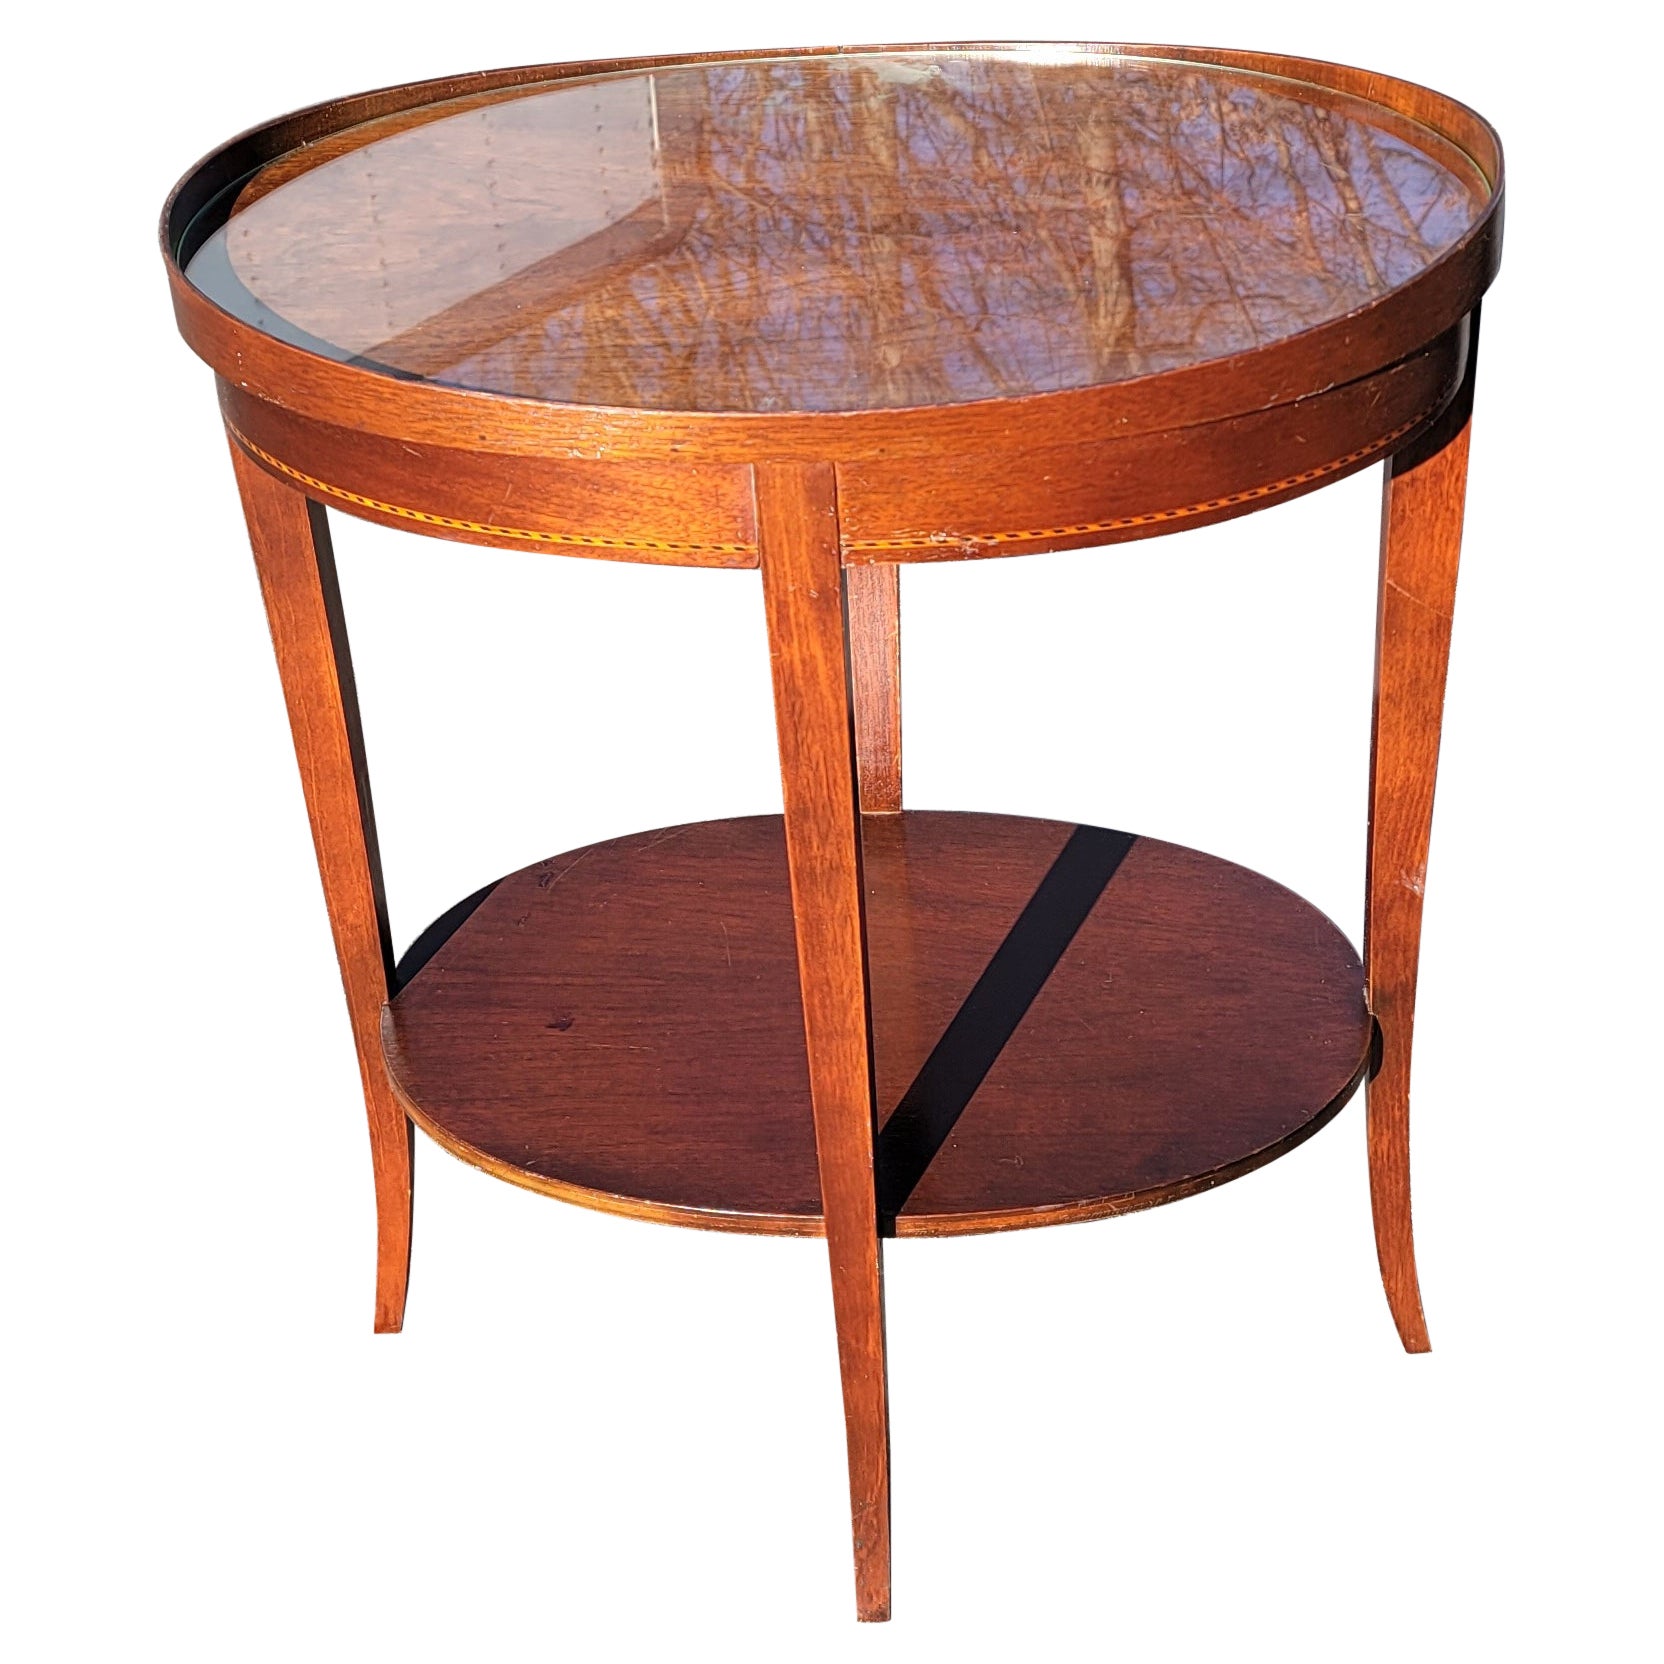 Mersman Tiered Mahogany Inlay Oval Side Table W/ Protective Glass Top For Sale